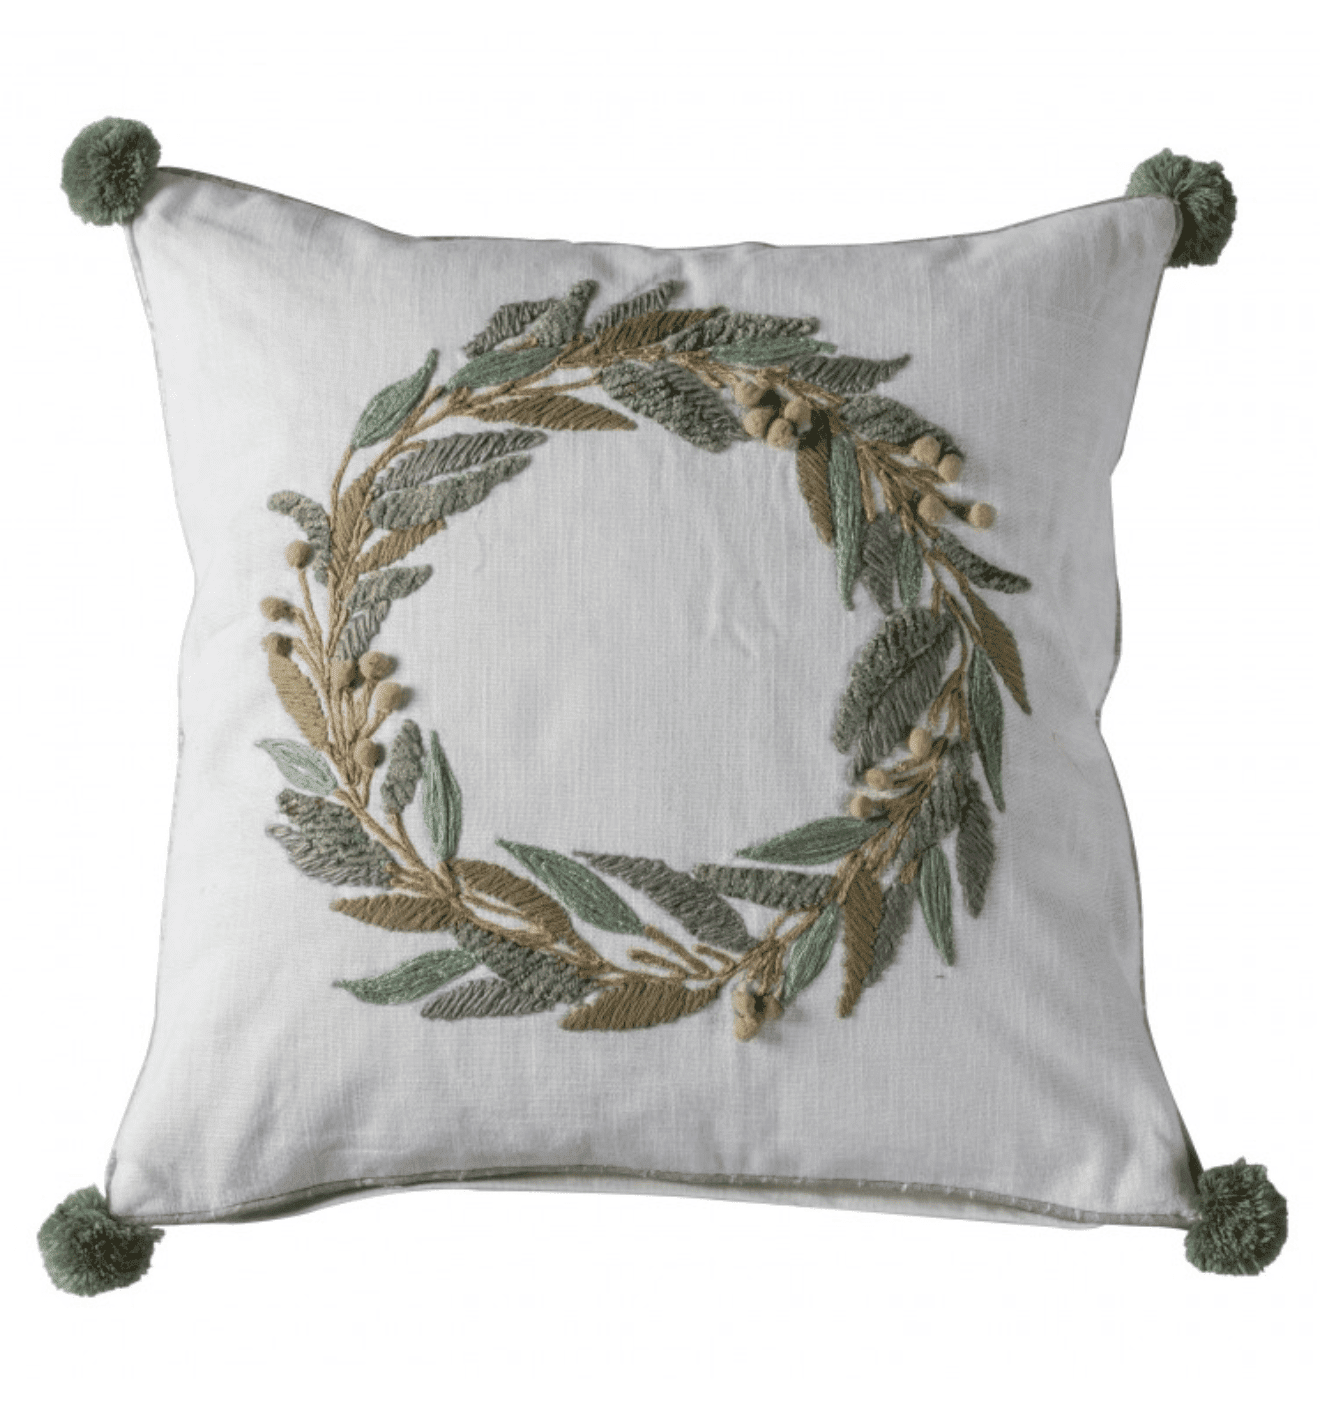 Embroidered Wreath Pom Pom Cushion - Outlet - Save 20%